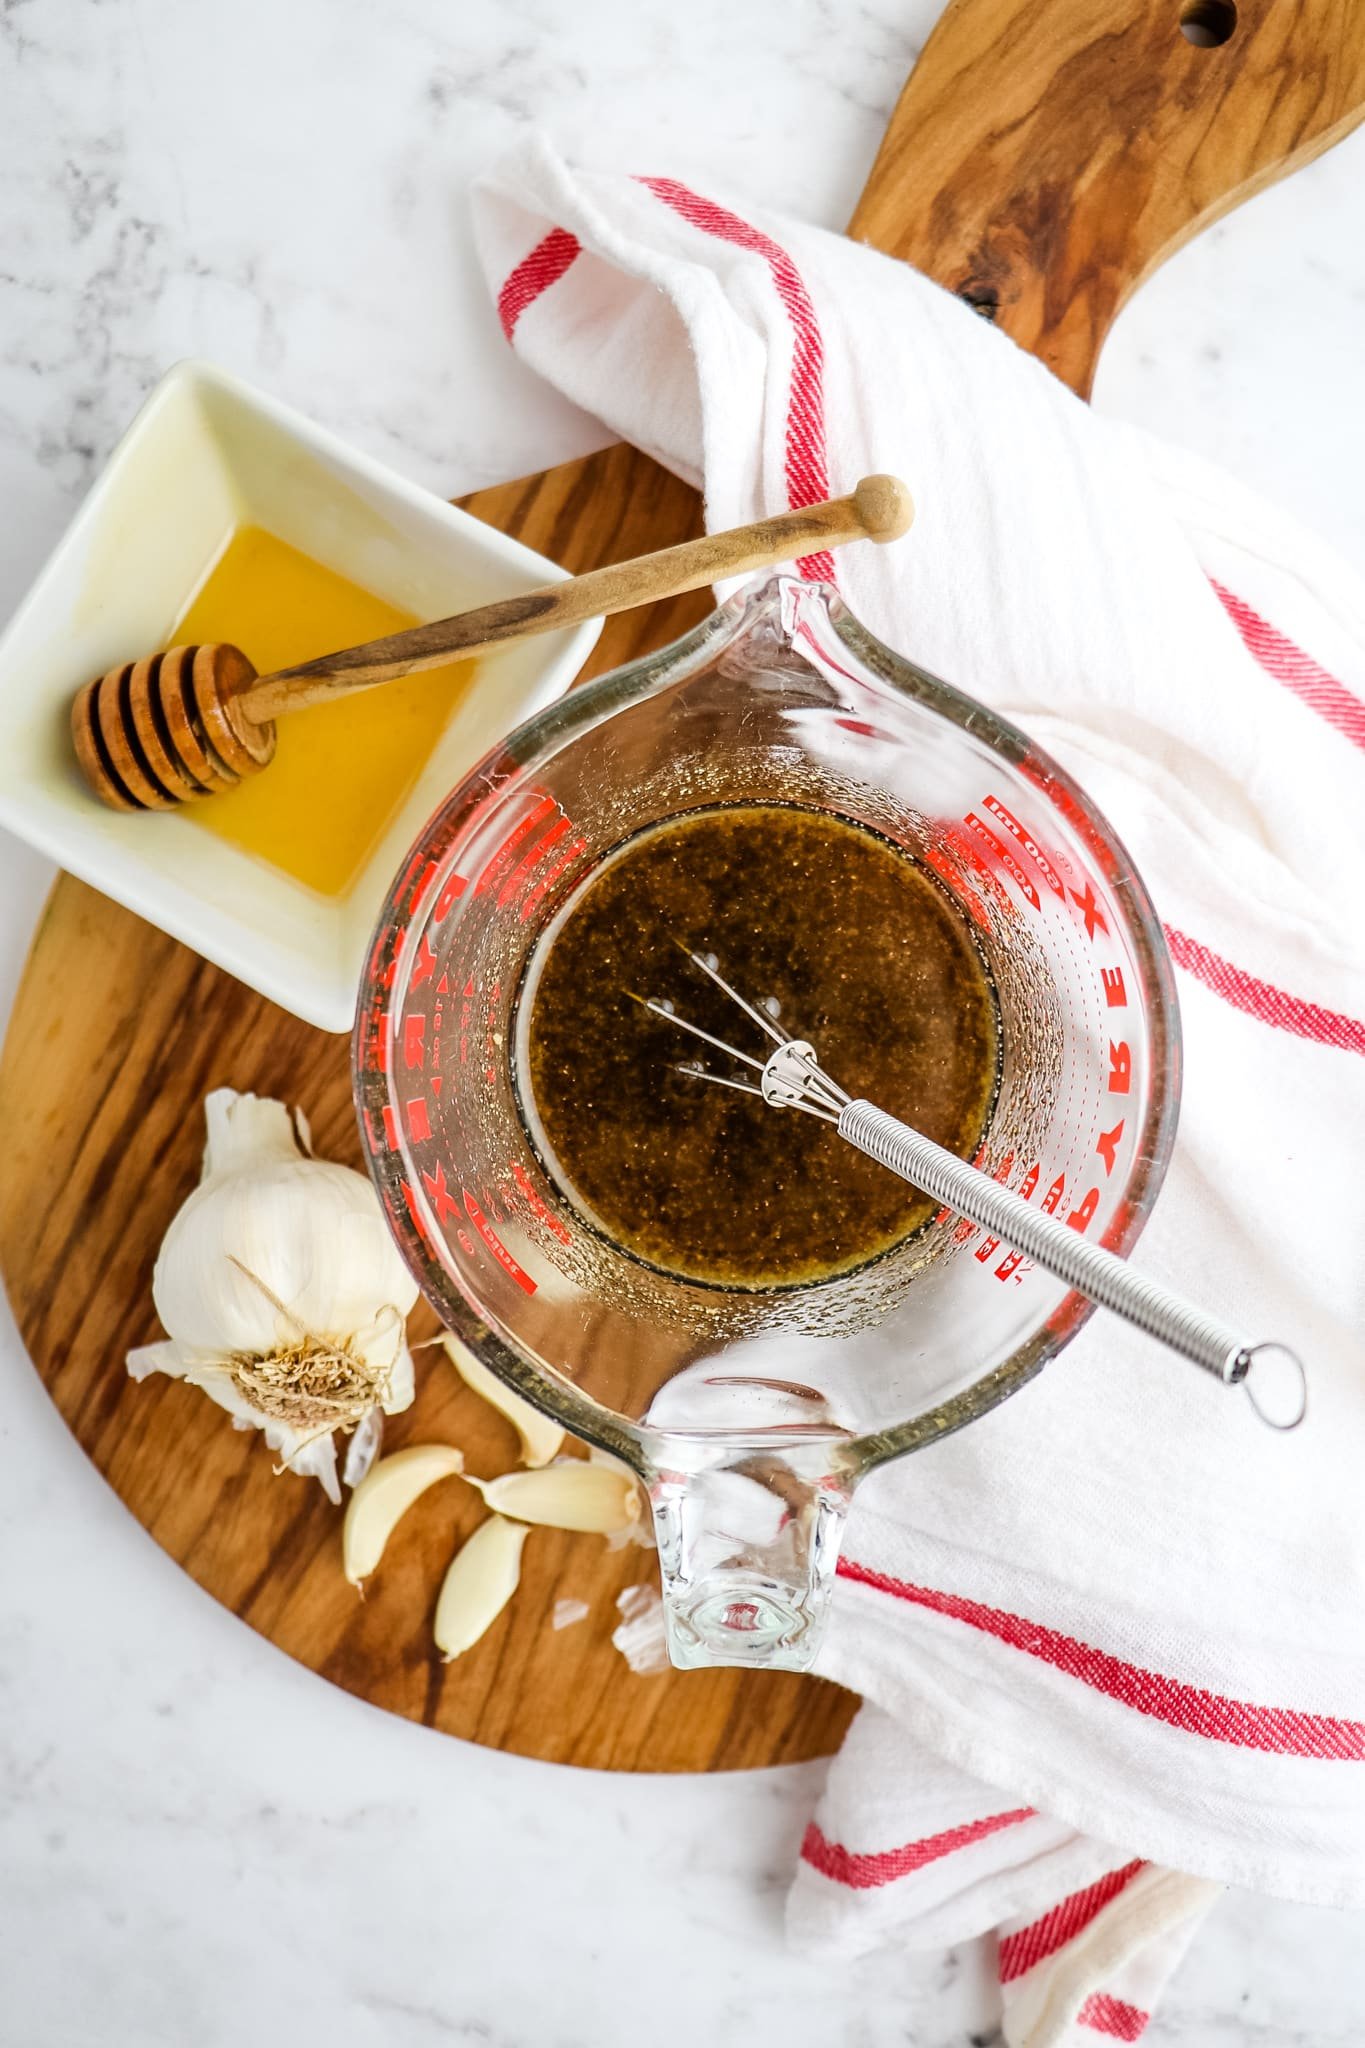 Honey garlic marinade in measuring cup with small whisk, garlic cloves and honey on the side.